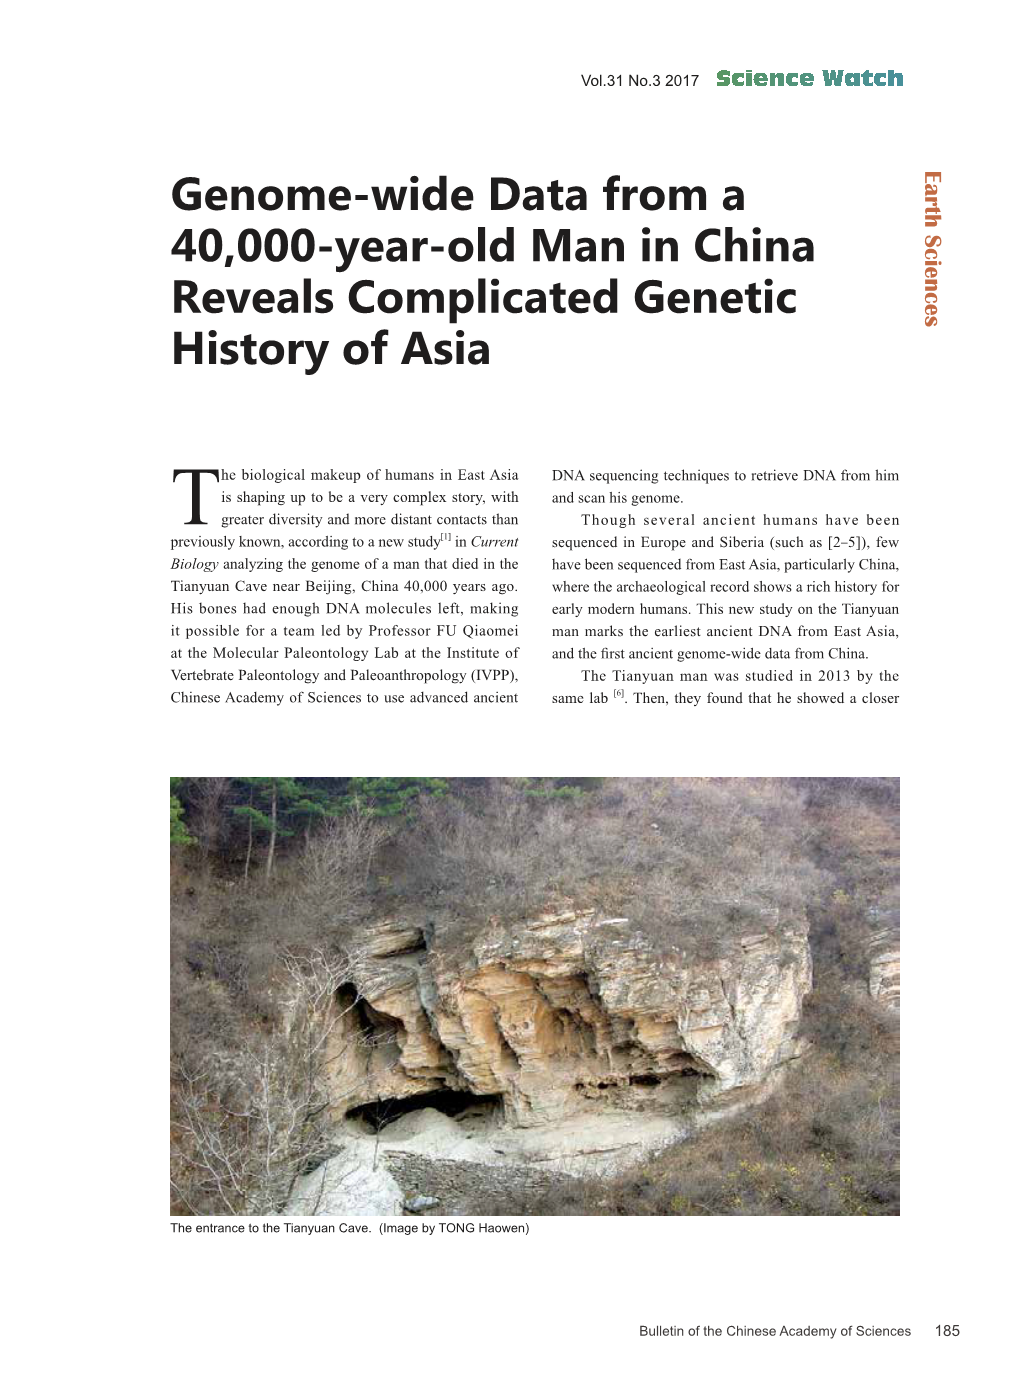 Genome-Wide Data from a 40,000-Year-Old Man in China Reveals Complicated Genetic History of Asia